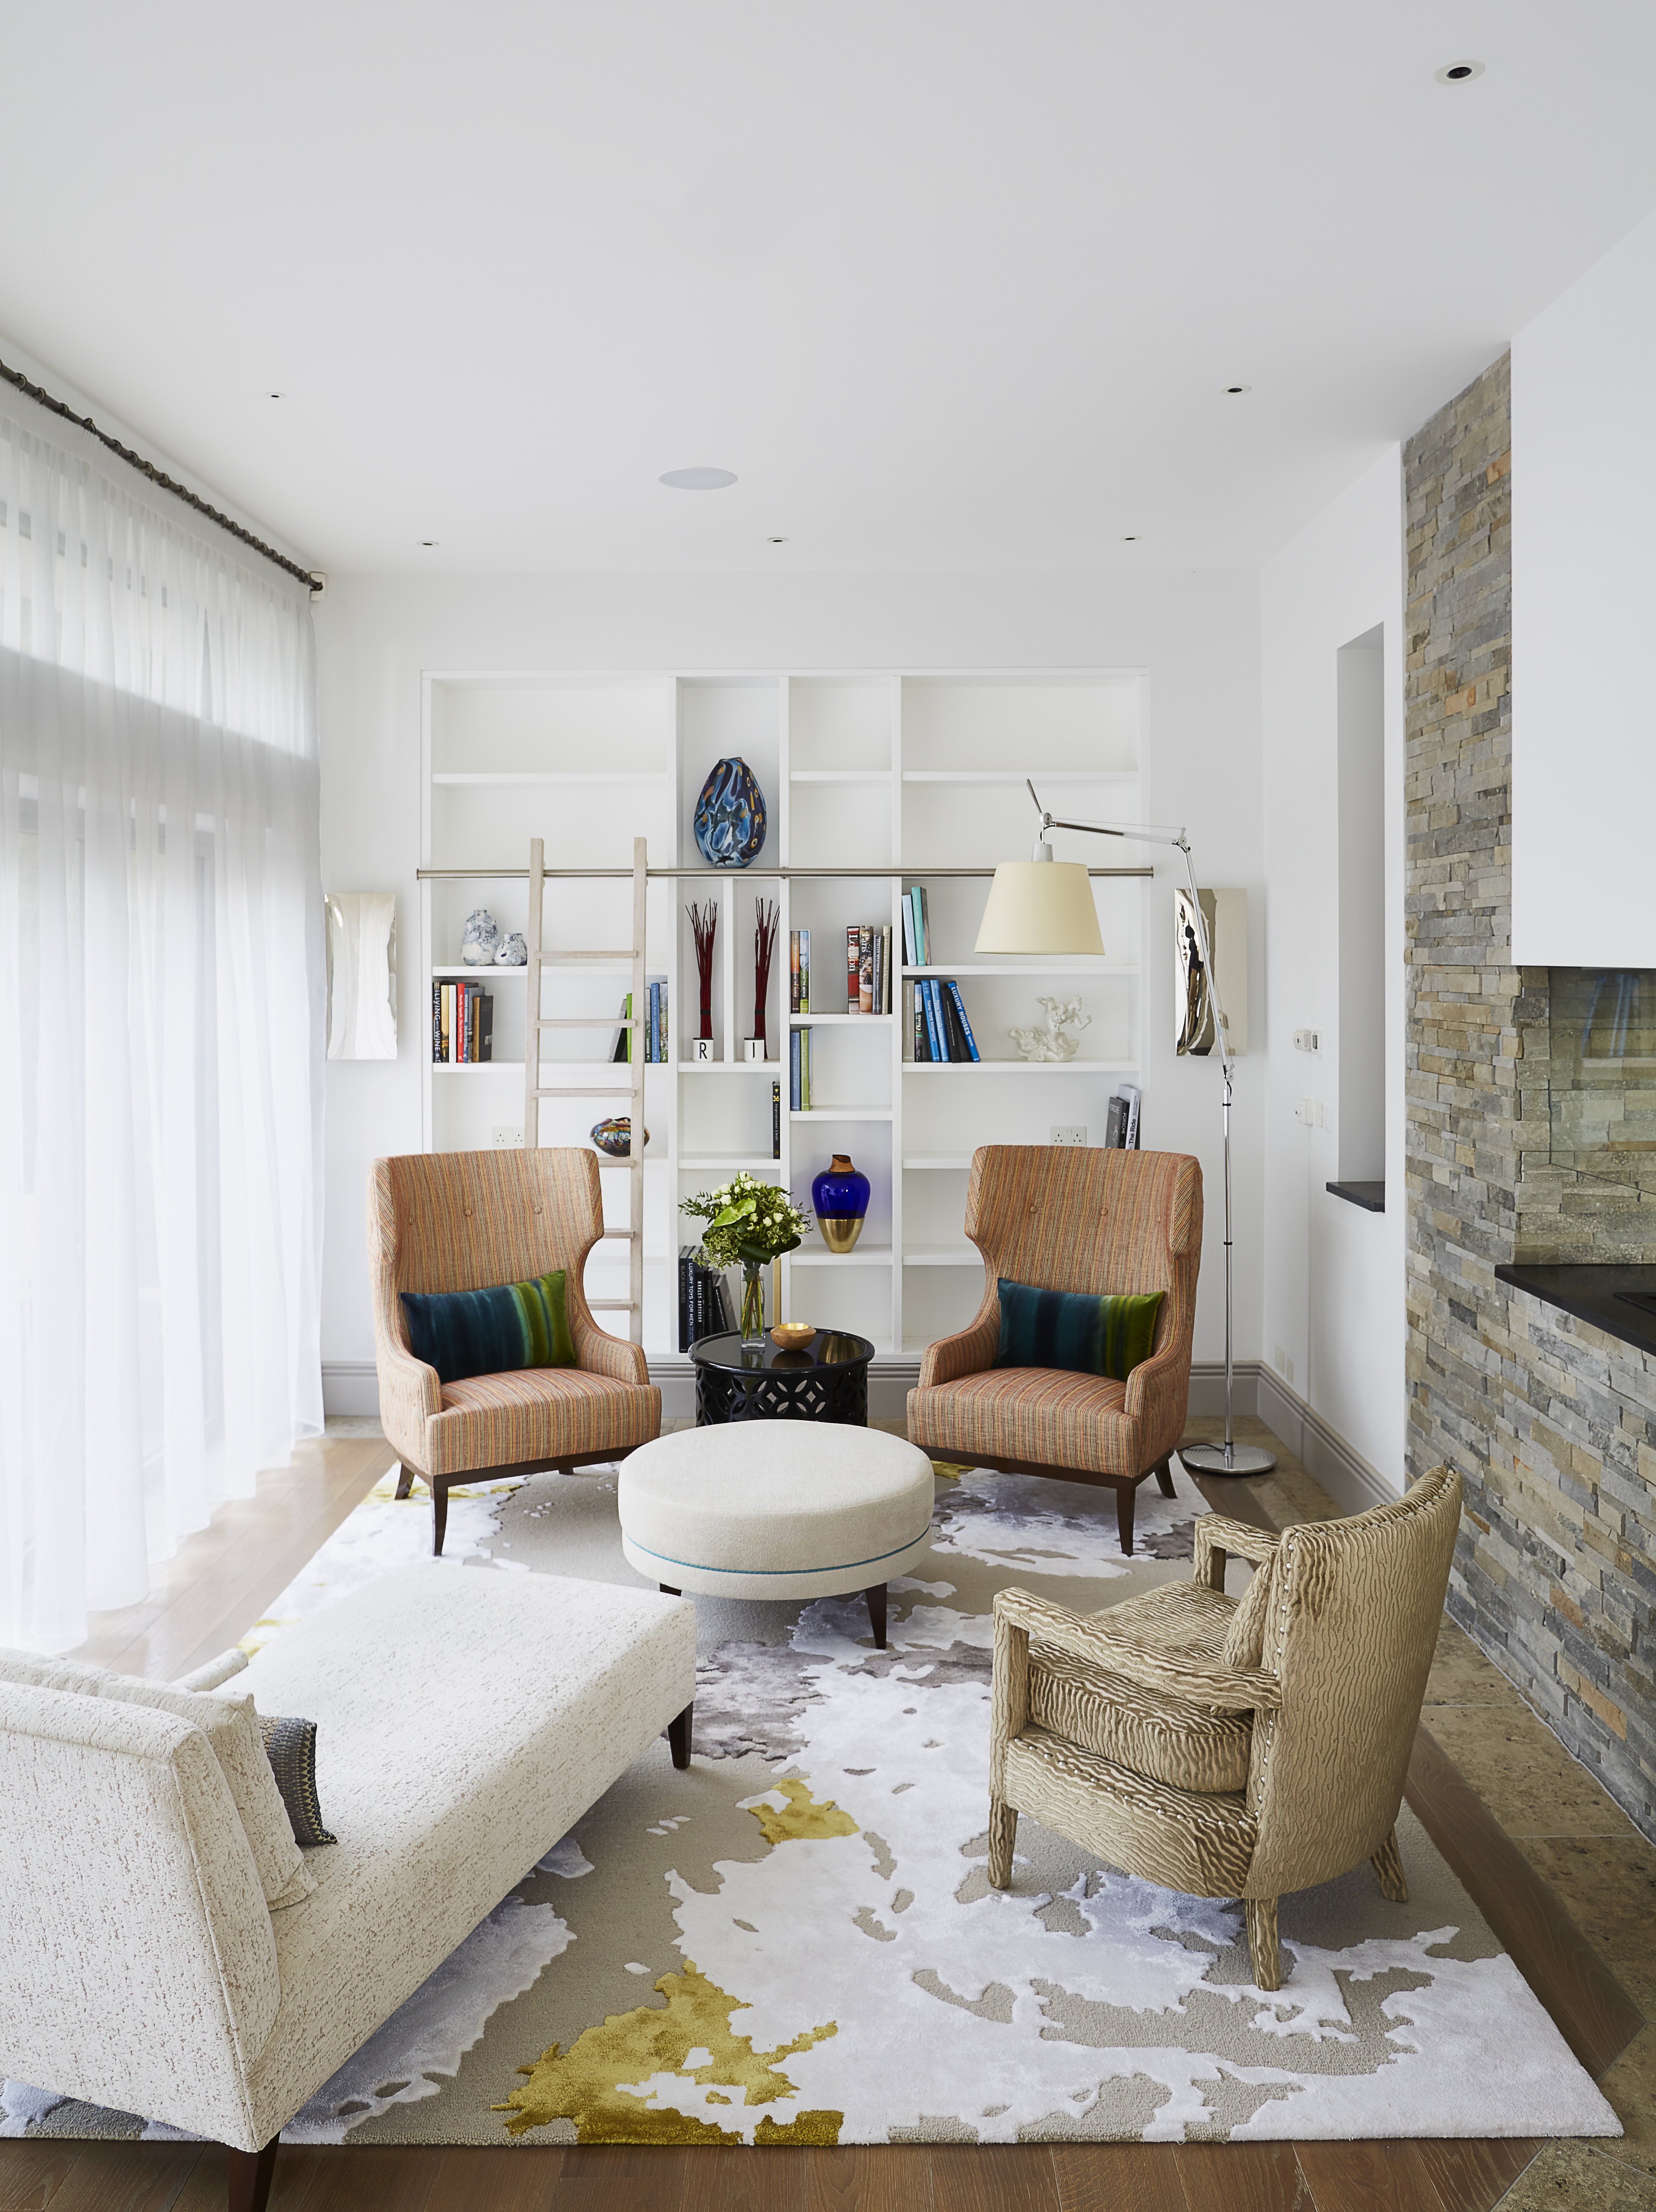 Residential interior design project in the UK by Wilkinson Beven Design